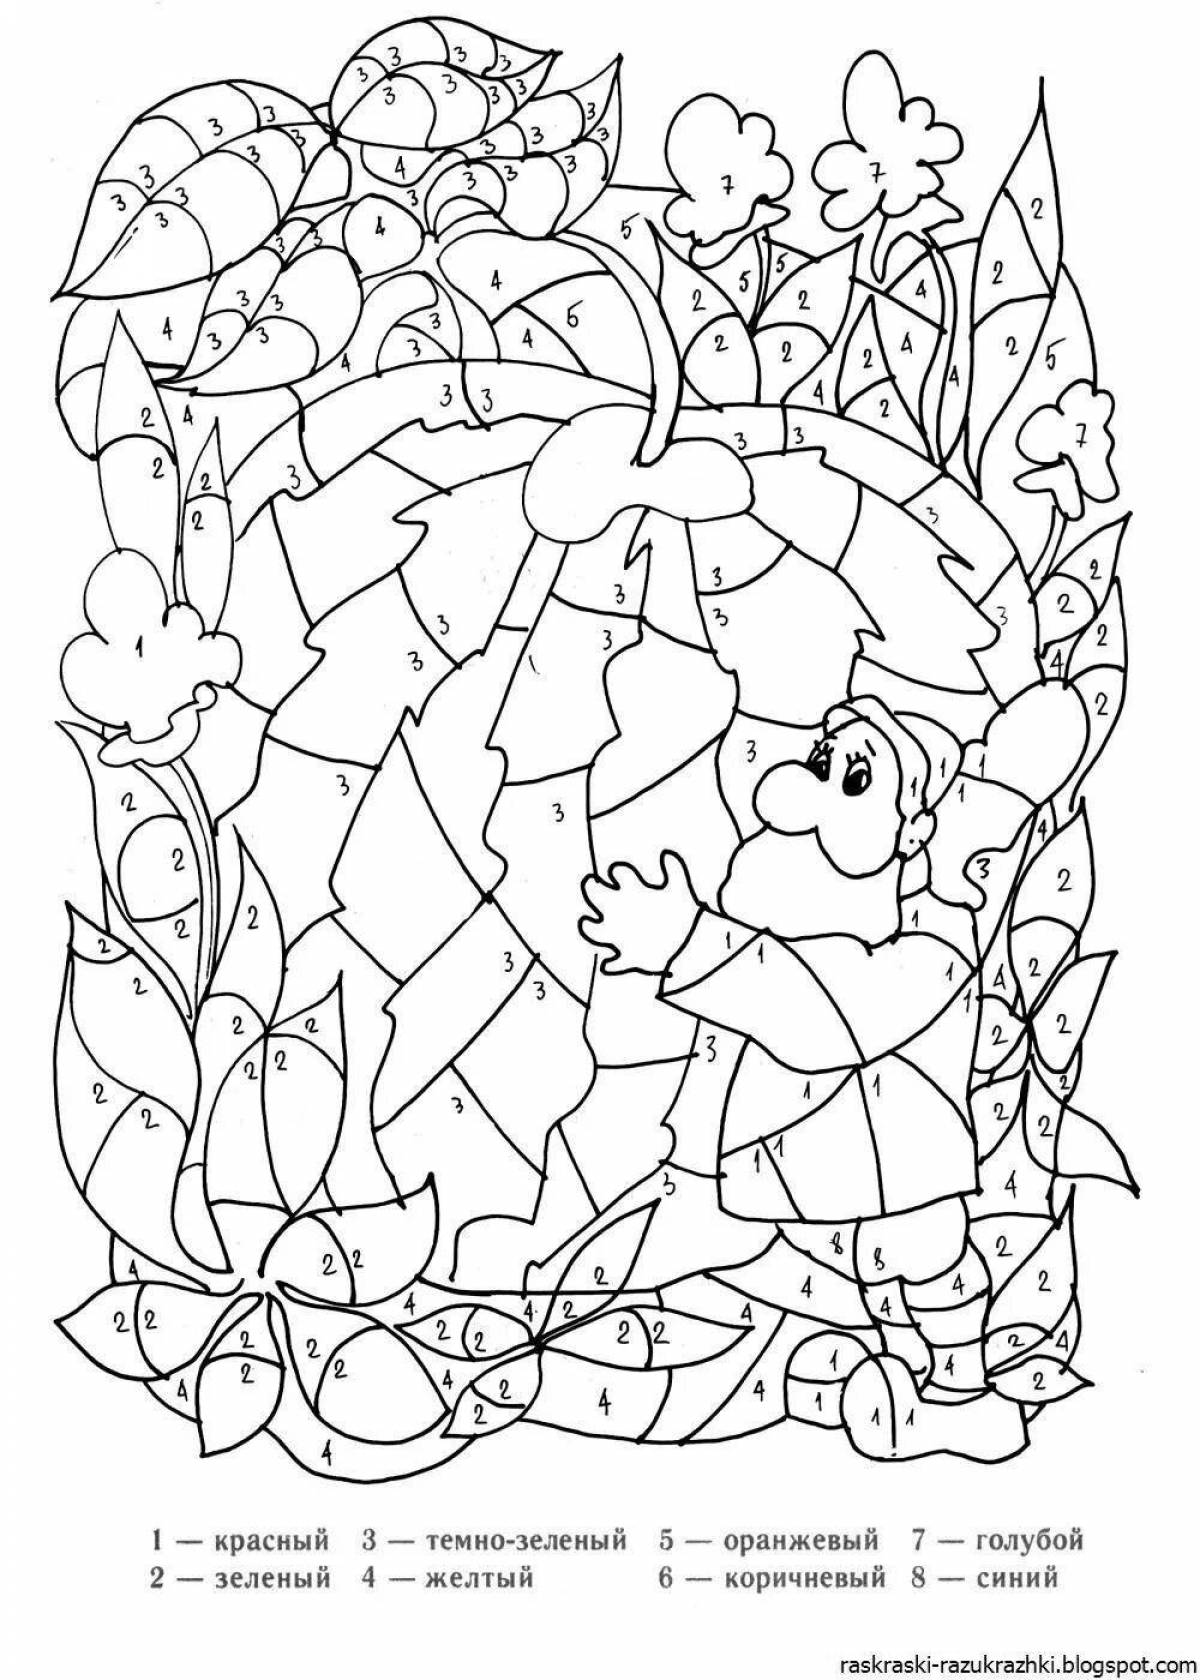 Colorful coloring book coloring by numbers